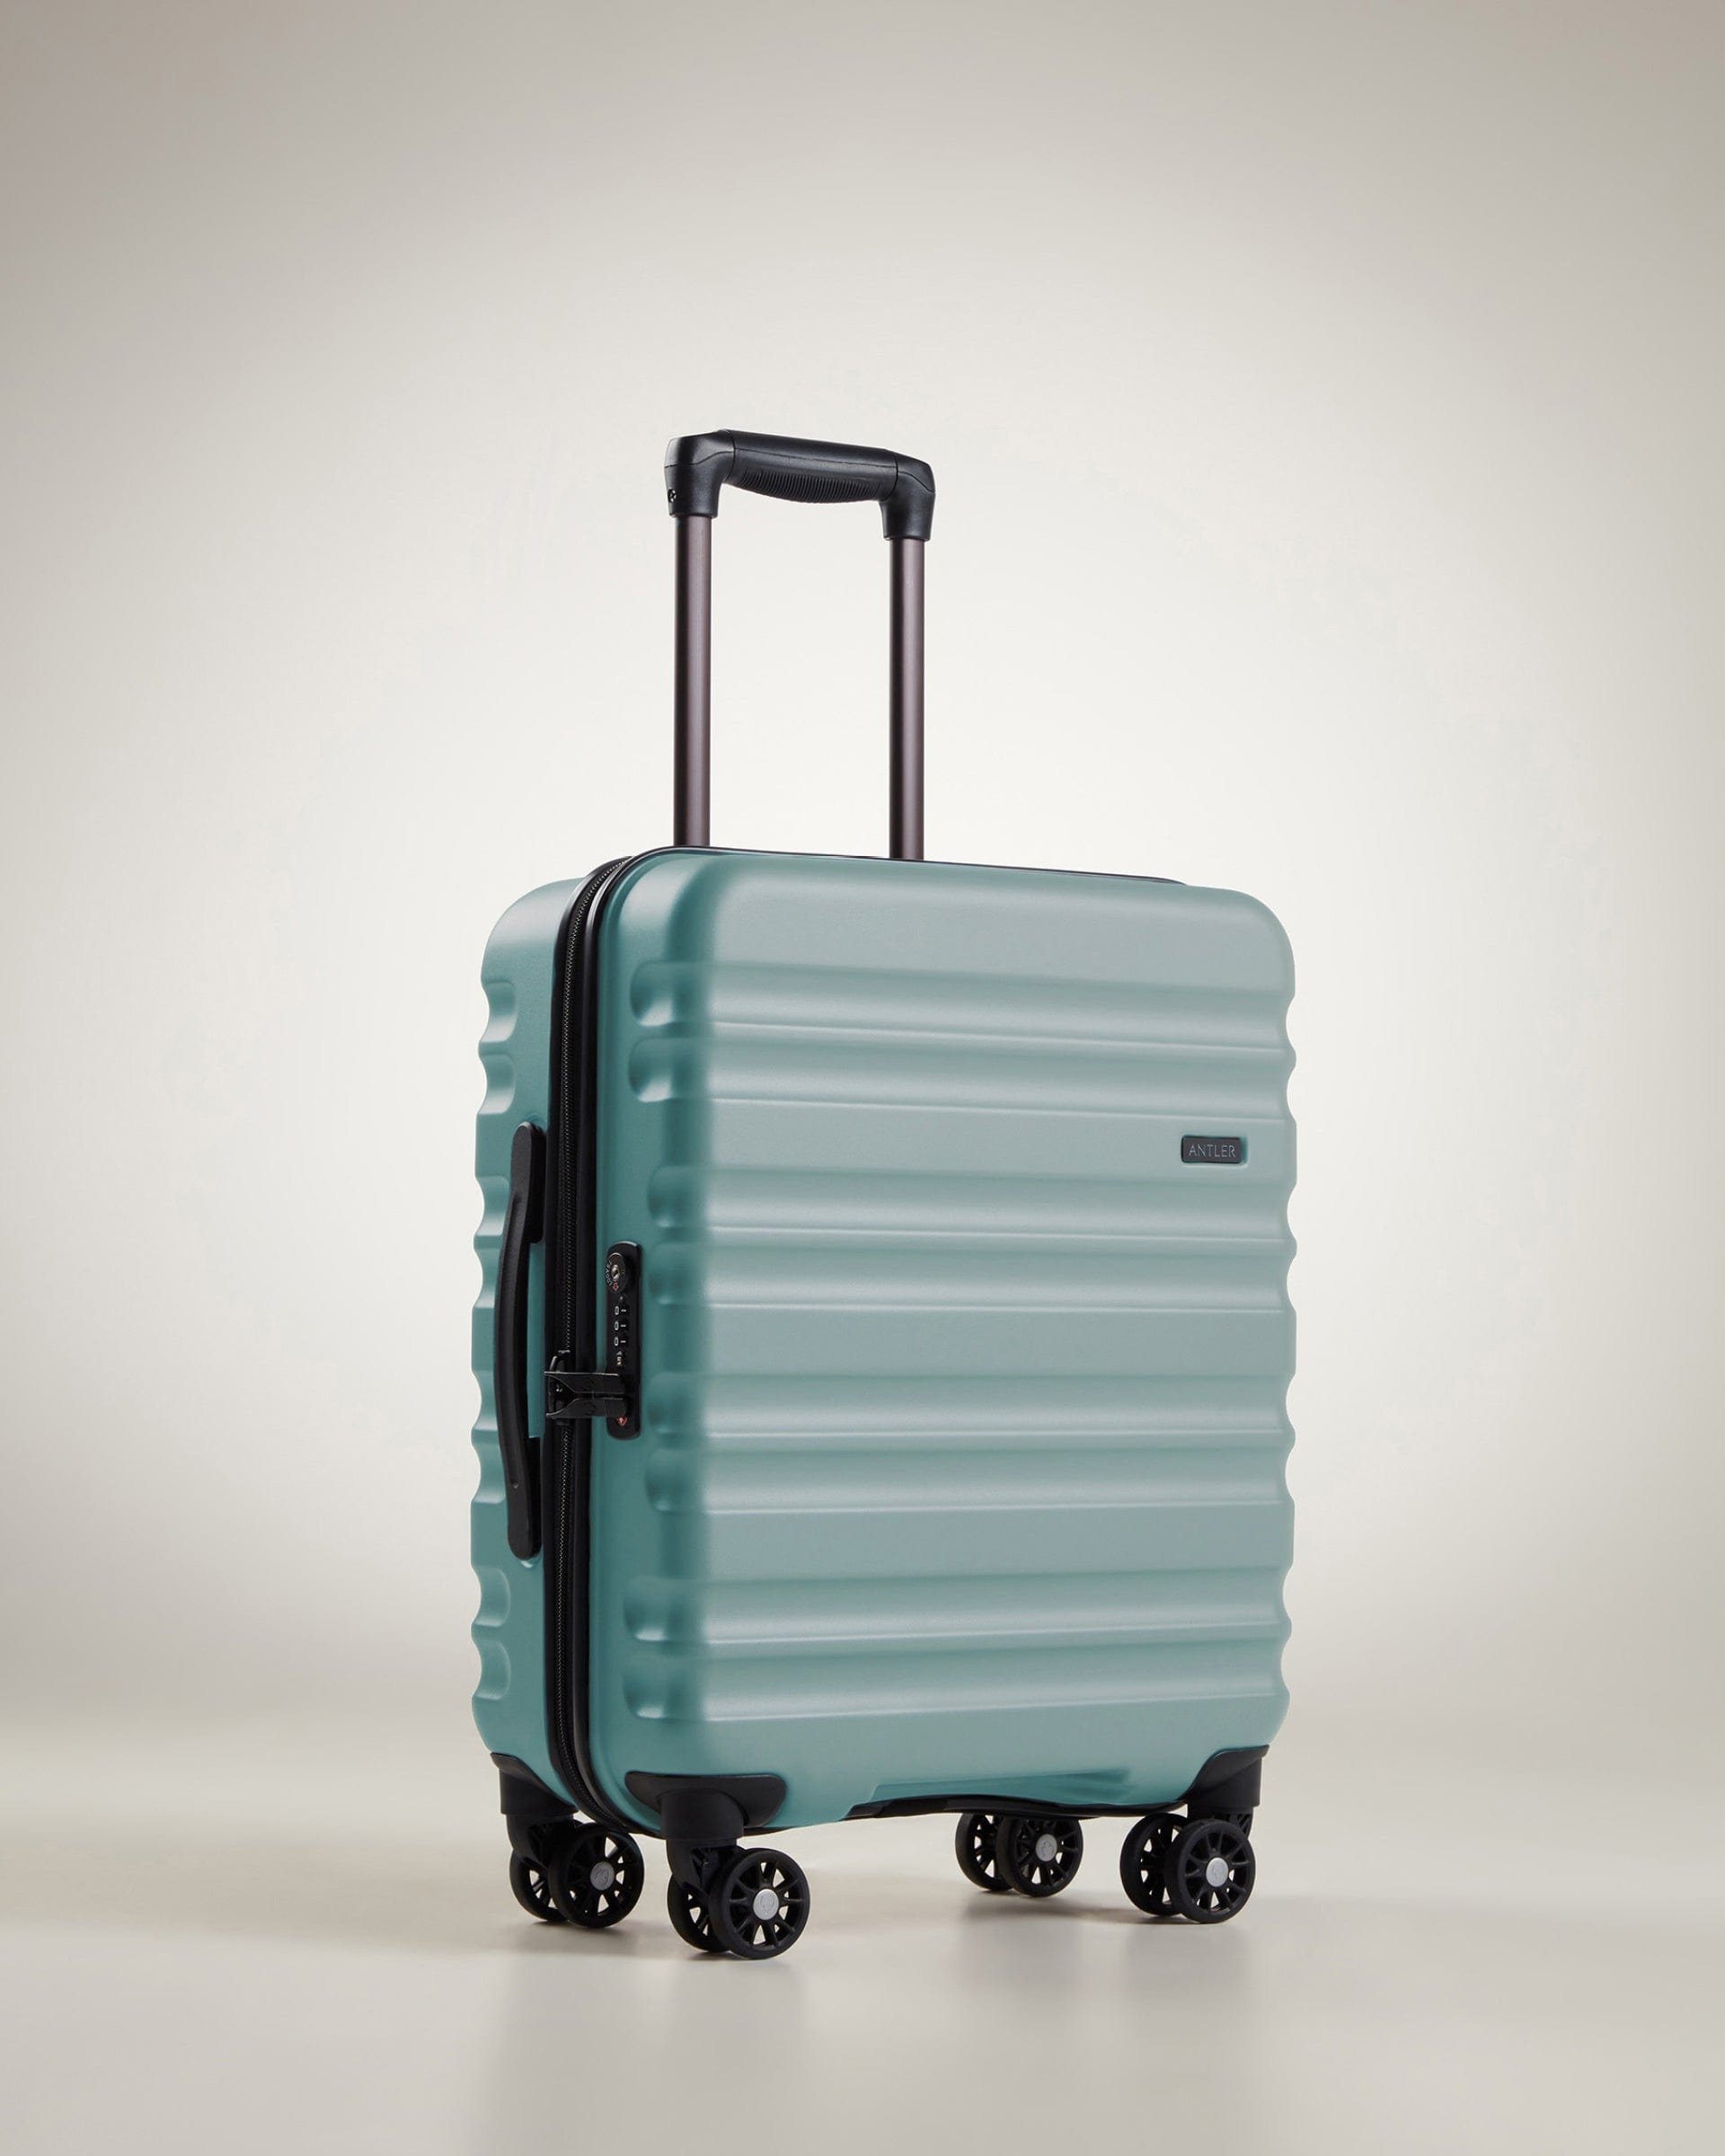 View Antler Clifton Cabin Suitcase In Mineral Size 55cm x 40cm x 20cm information